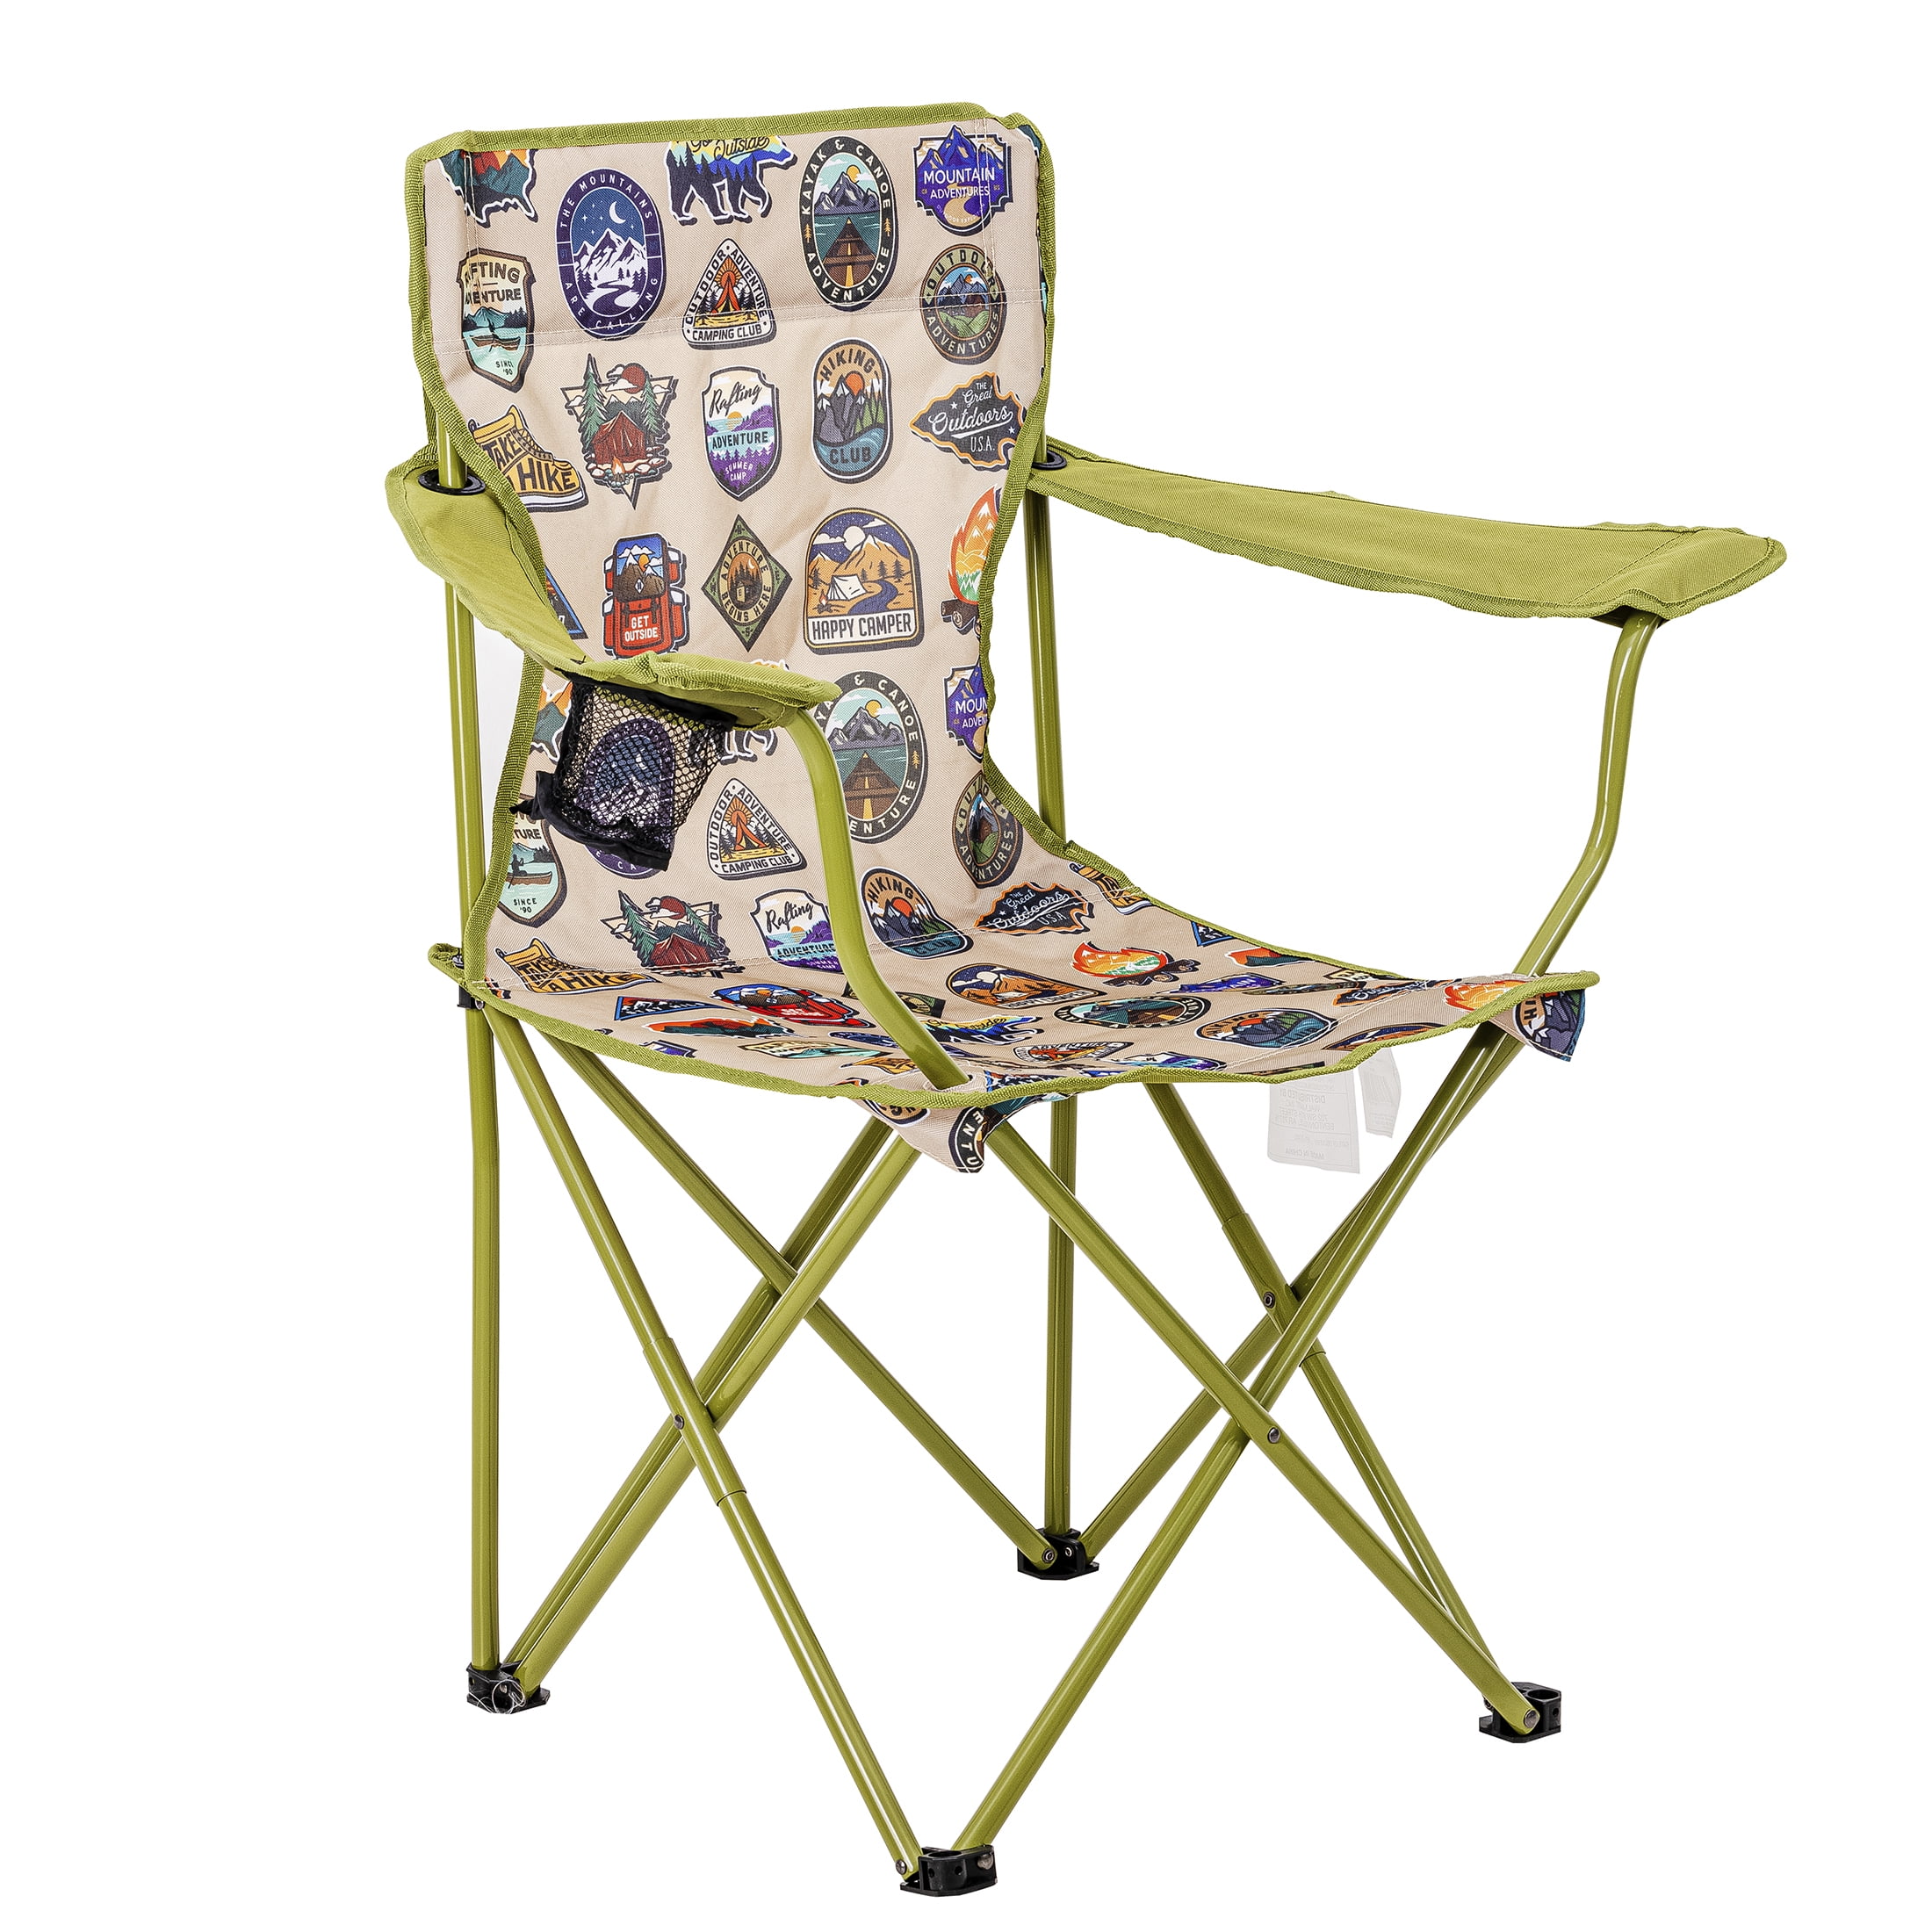 Ozark Trail Camp Chair (Green with Camping Patches, Adult) $9 + Free S&H w/ Walmart+ or $35+